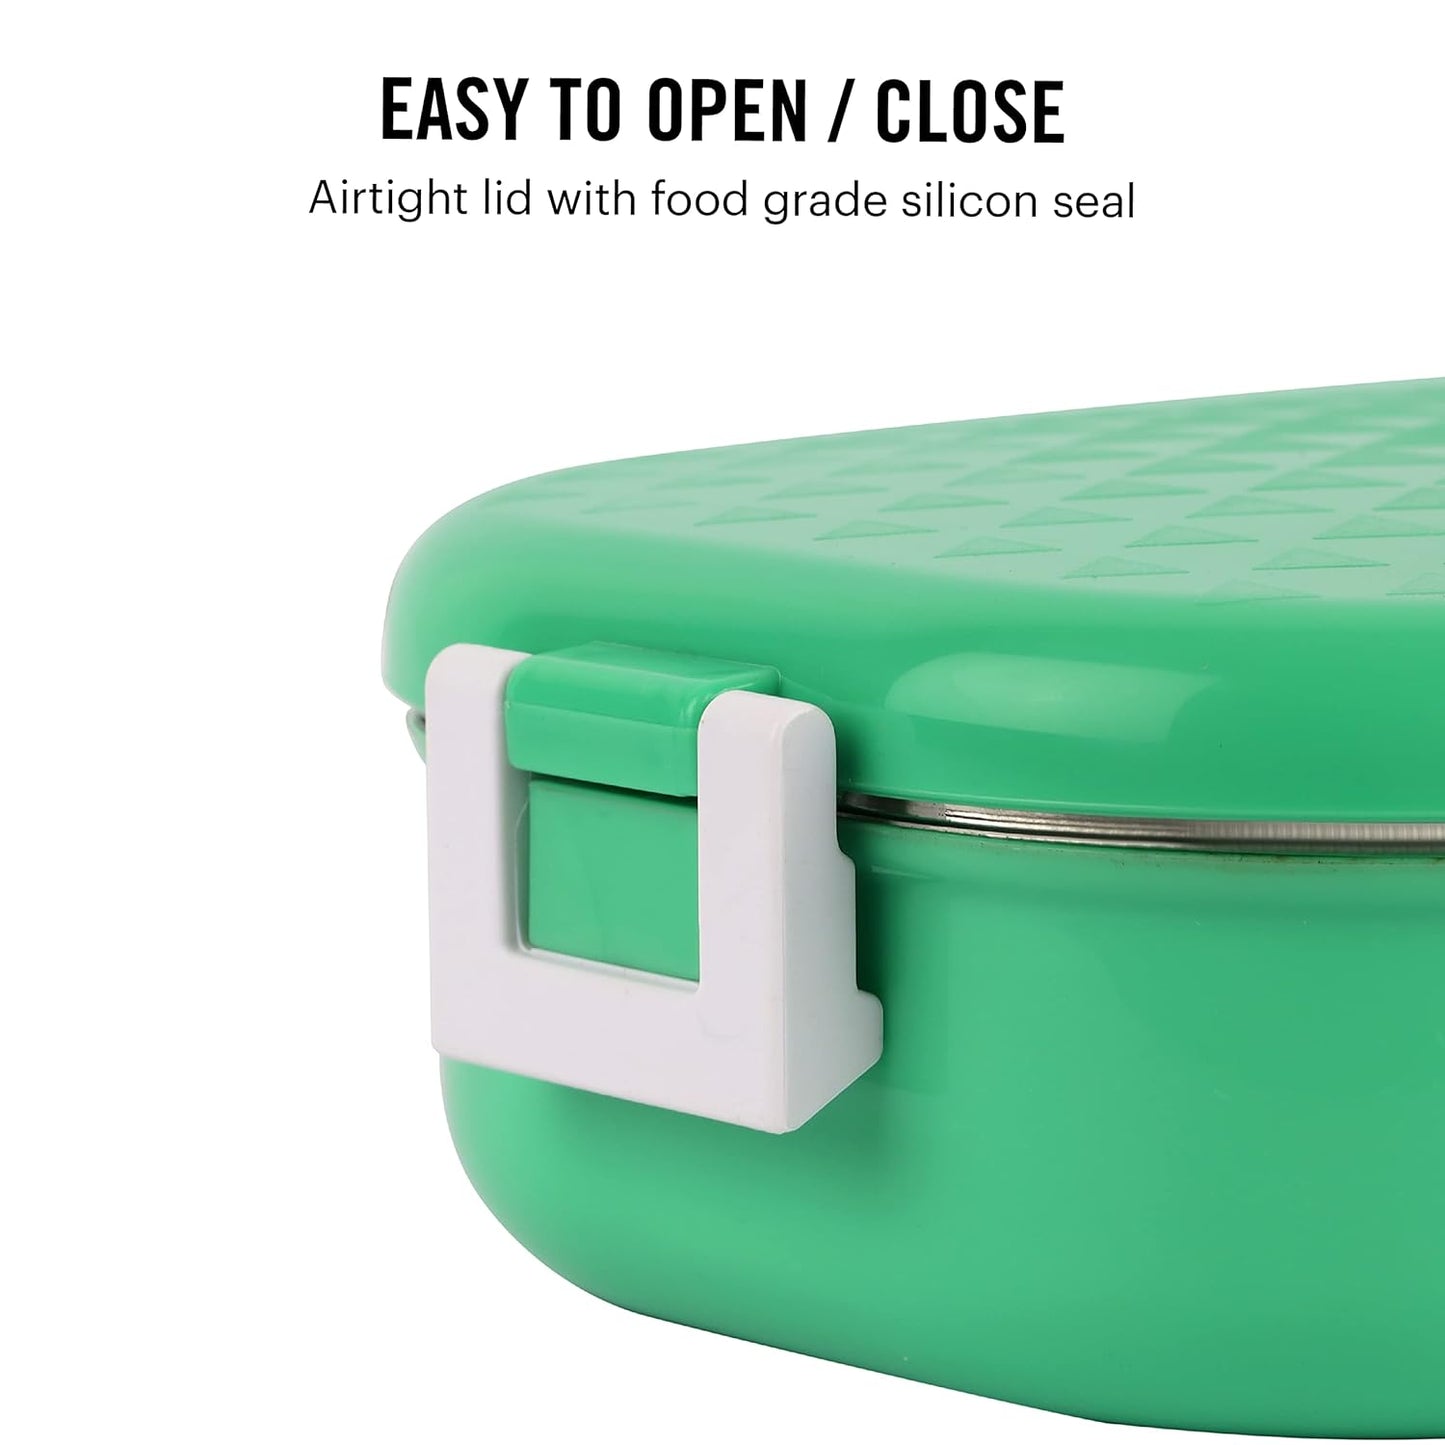 CELLO Altro Neo Lunch Box, Neo Green, 700ml | 2 Units Insulated Lunch Boxes for kids and adult both